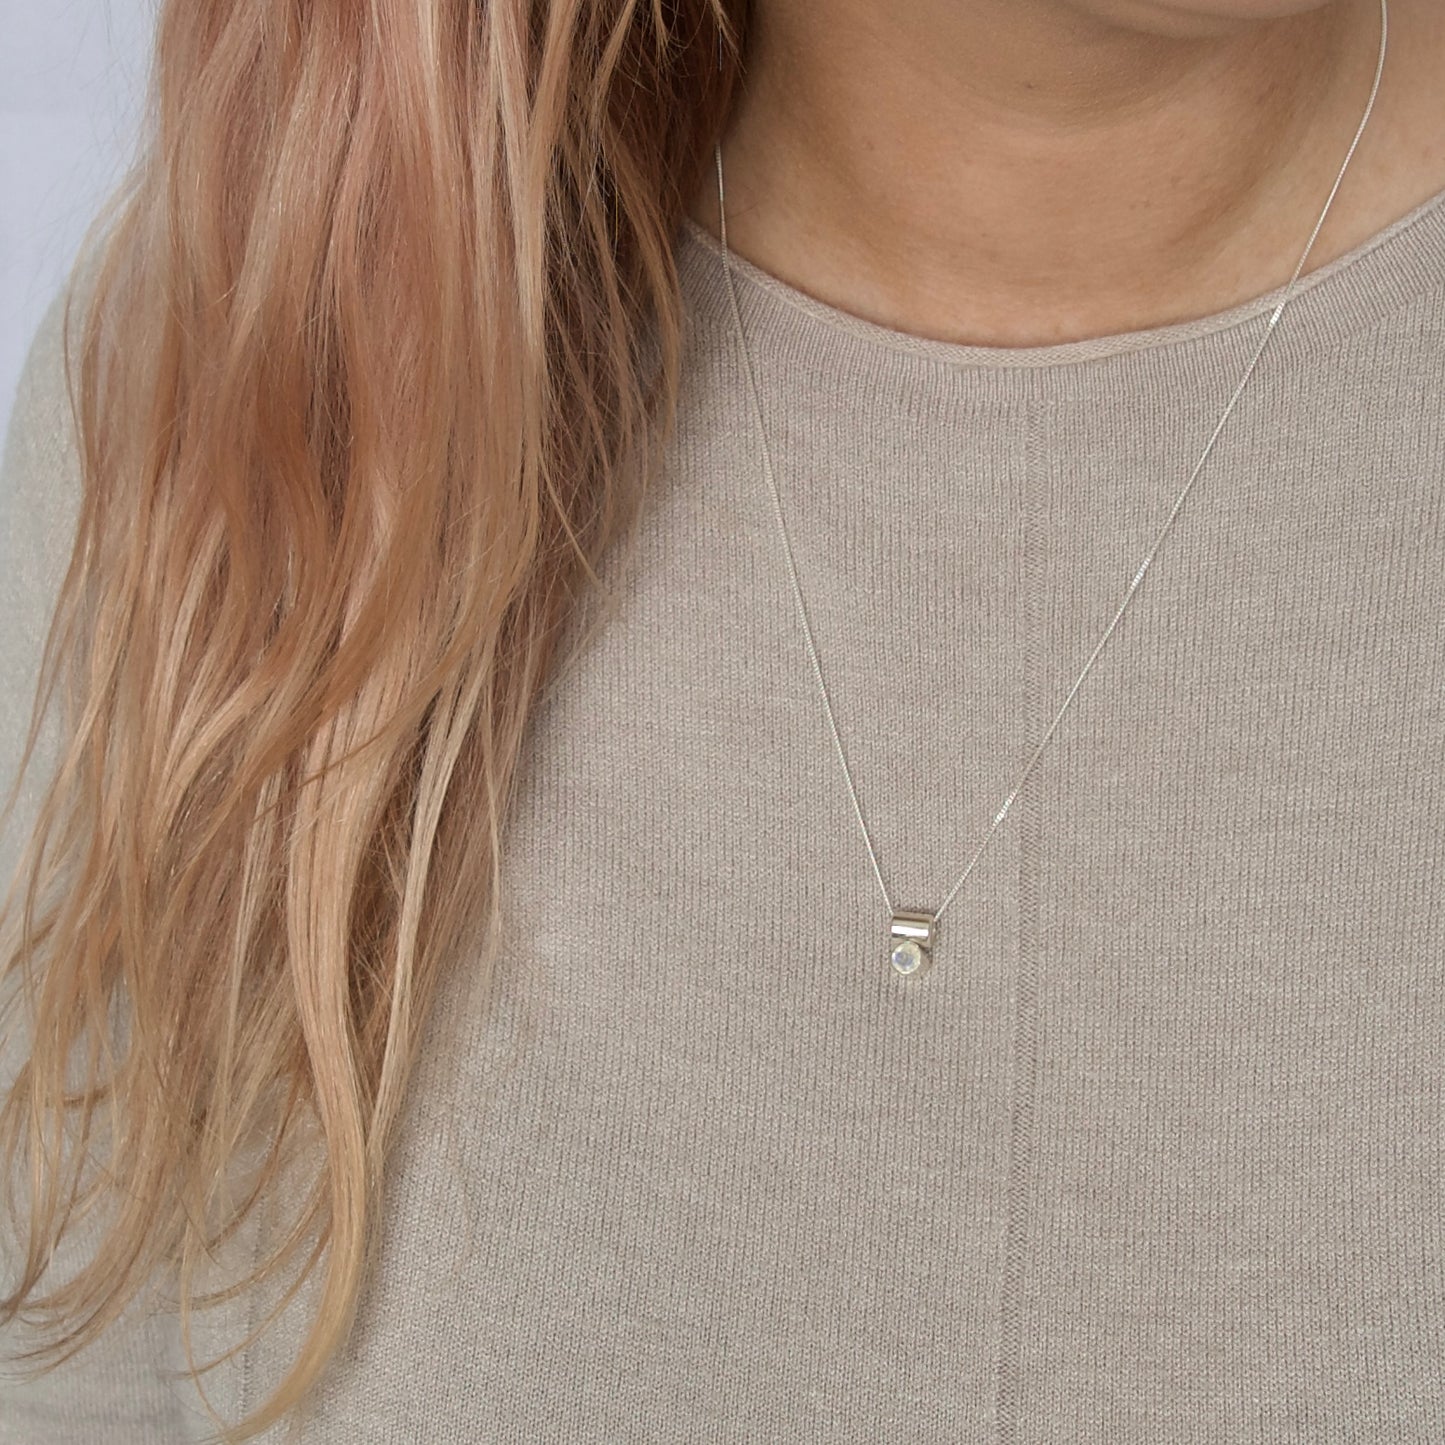 'Friendship/Connection' Moonstone Necklace